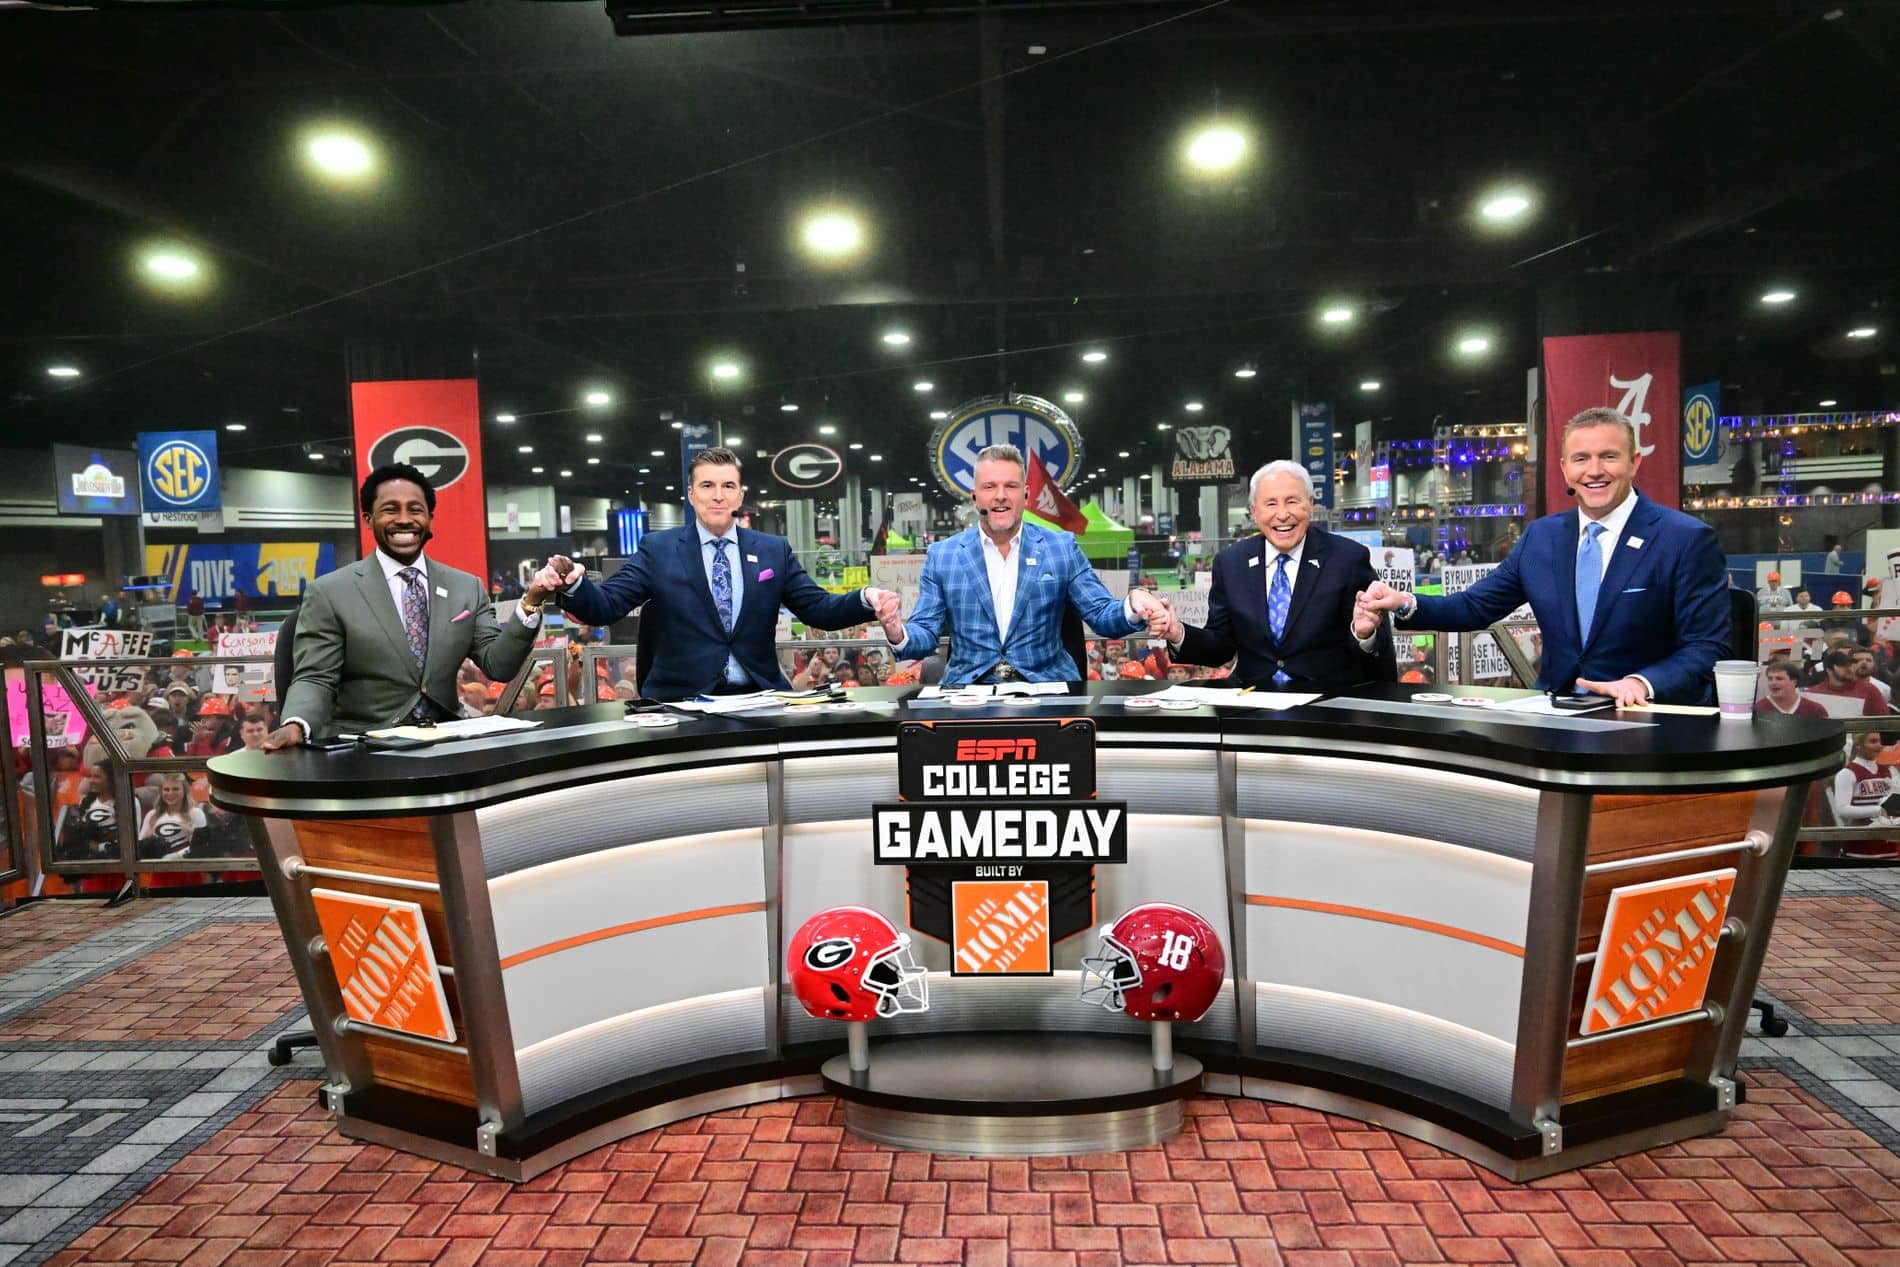 ESPN to Air its ‘College GameDay’ Ratings Topping Preview Show in